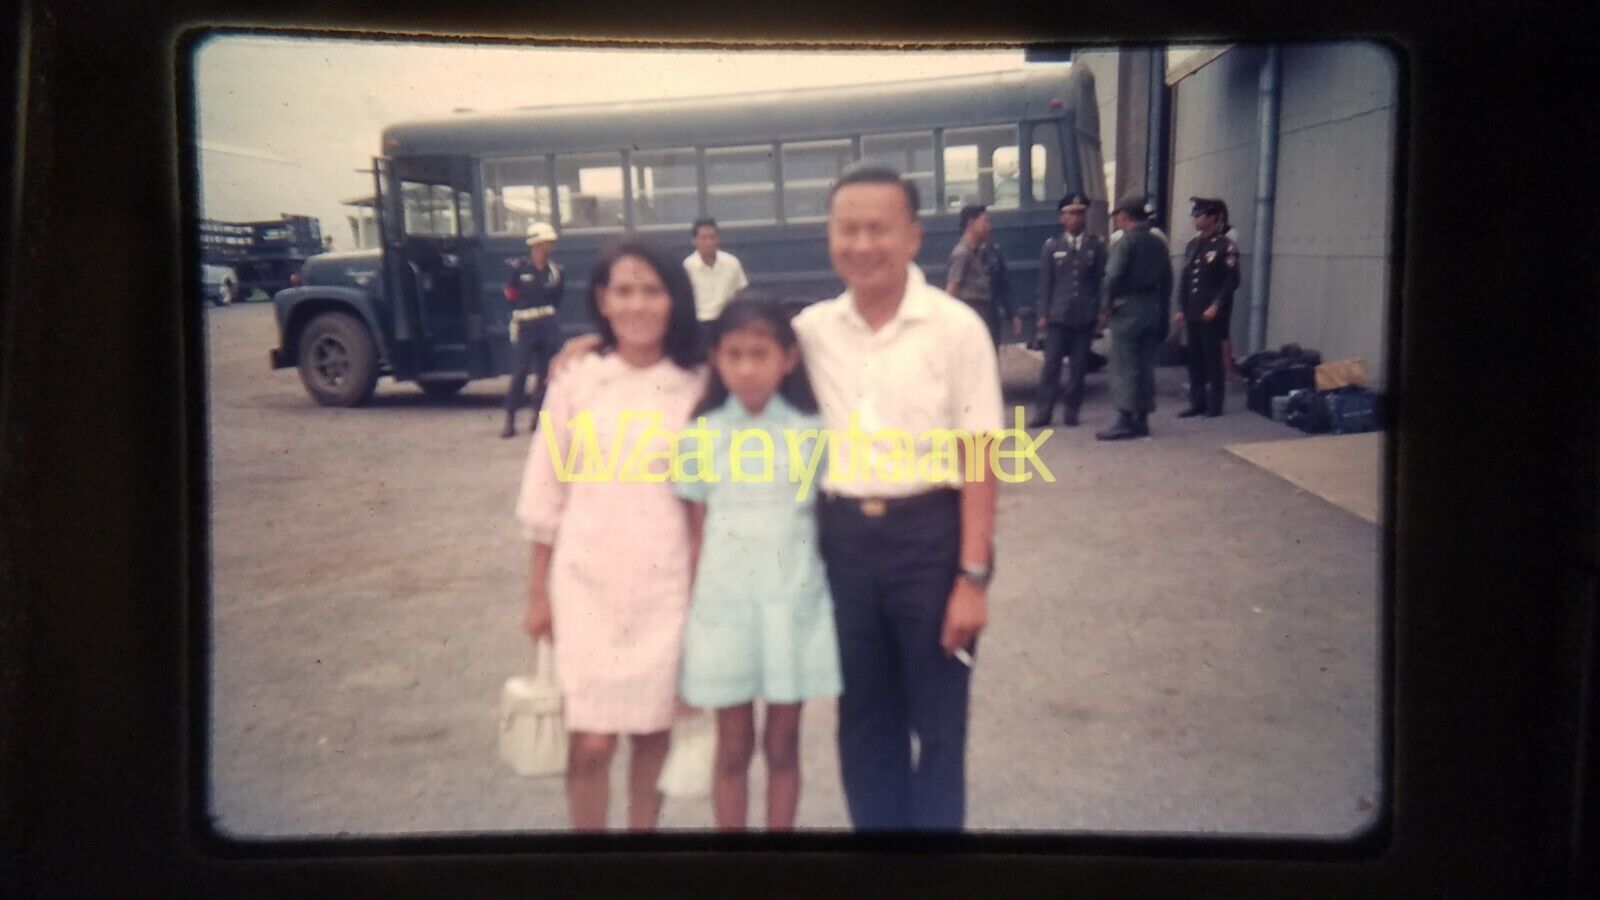 XXFV02 Vintage 35MM SLIDE FAMILY OF 3 WITH SOLDIERS AND MILITARY BUS IN BKGD